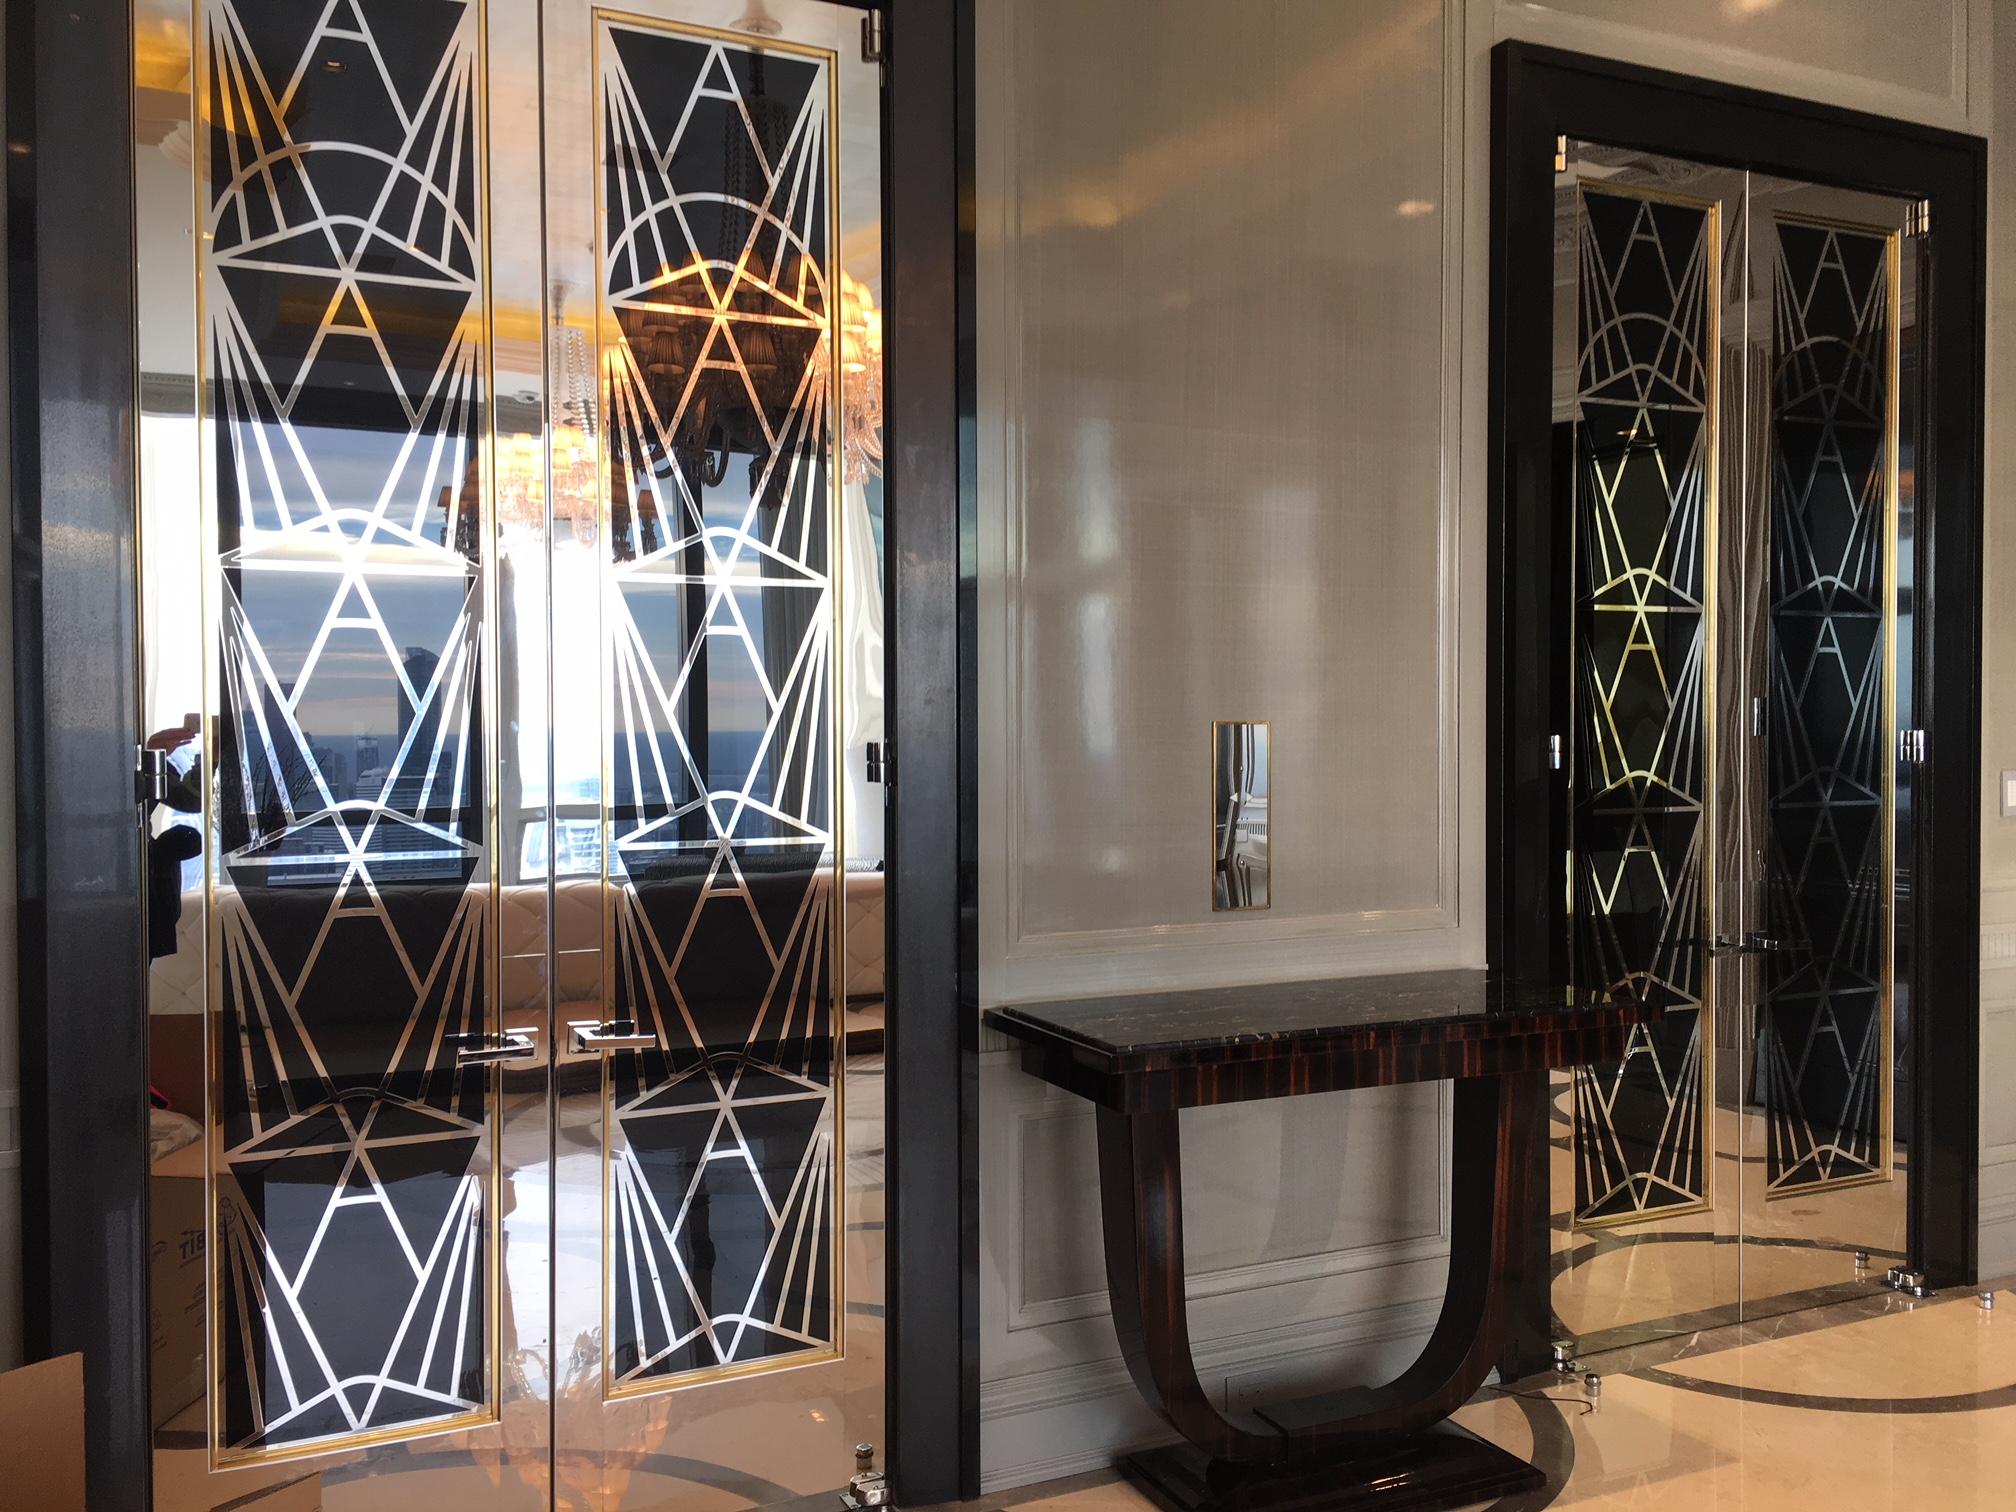 Set of custom Art Deco-style doors designed for a penthouse at the Four Seasons. Installed for one year of use and uninstalled. Doors are finished in laminated glass, polished stainless steel, and have polished bronze glass stops. Stainless steel